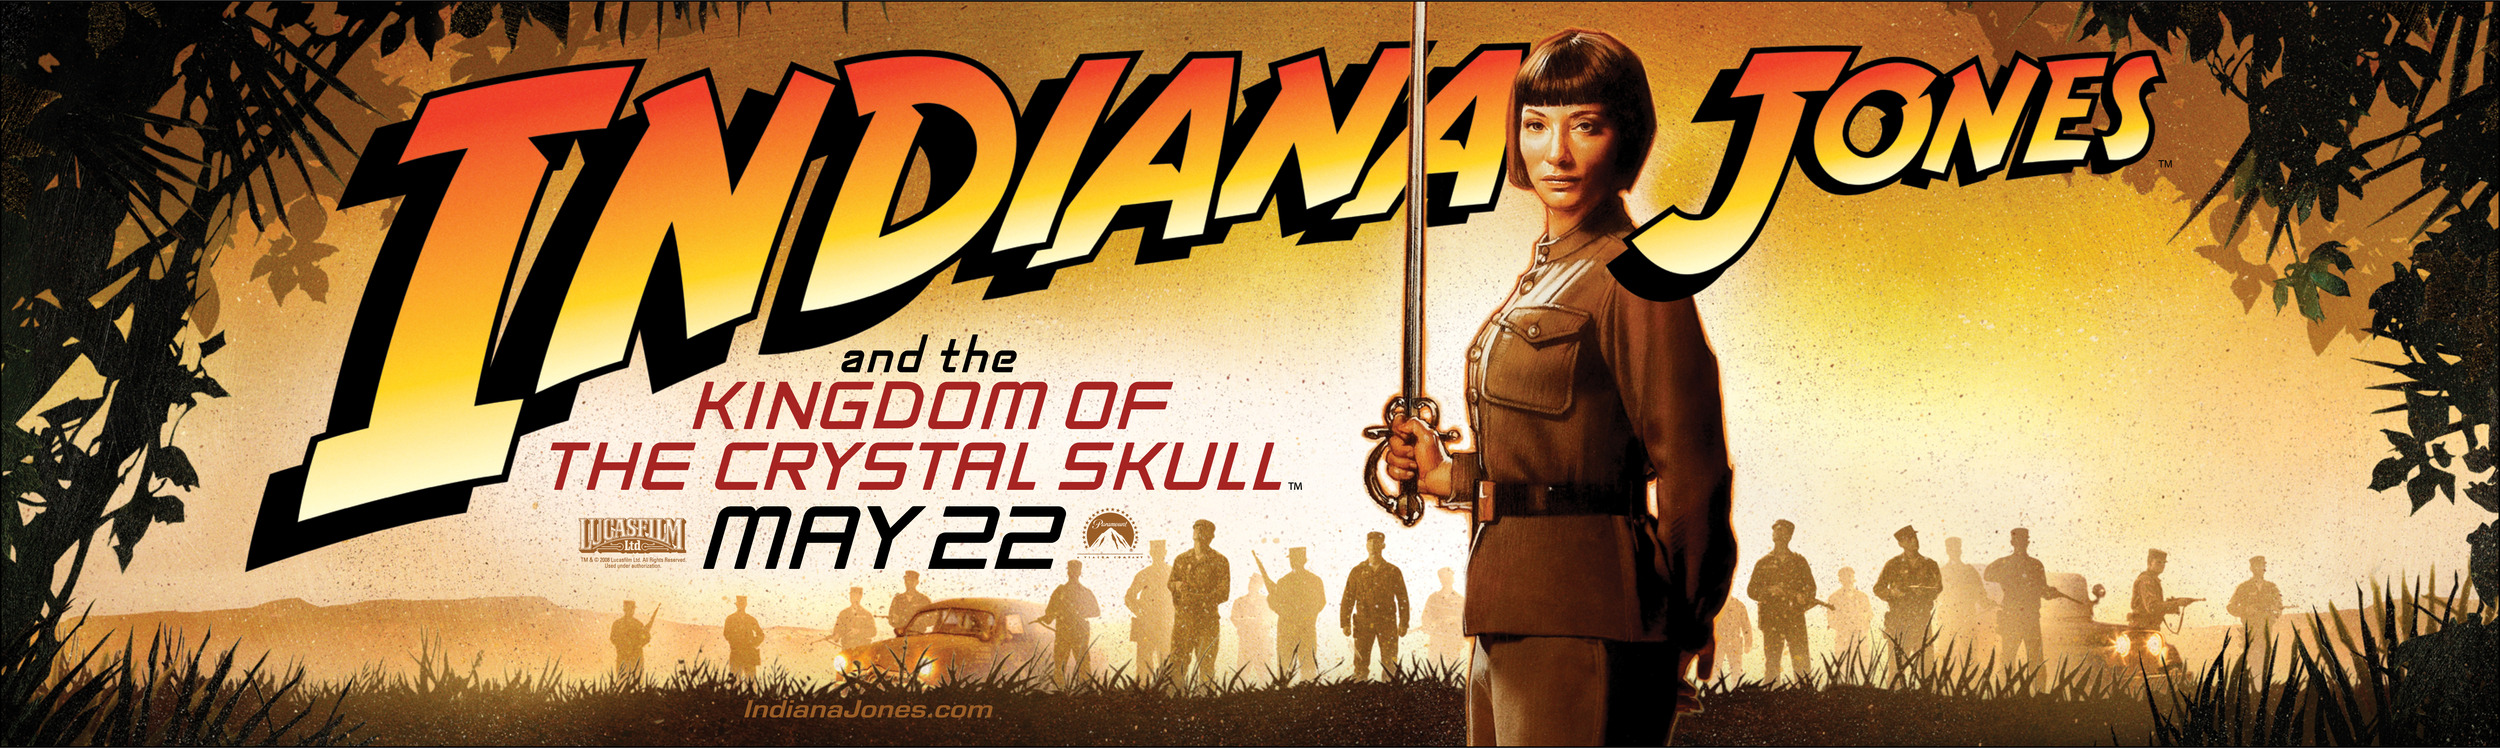 Mega Sized Movie Poster Image for Indiana Jones and the Kingdom of the Crystal Skull (#7 of 11)